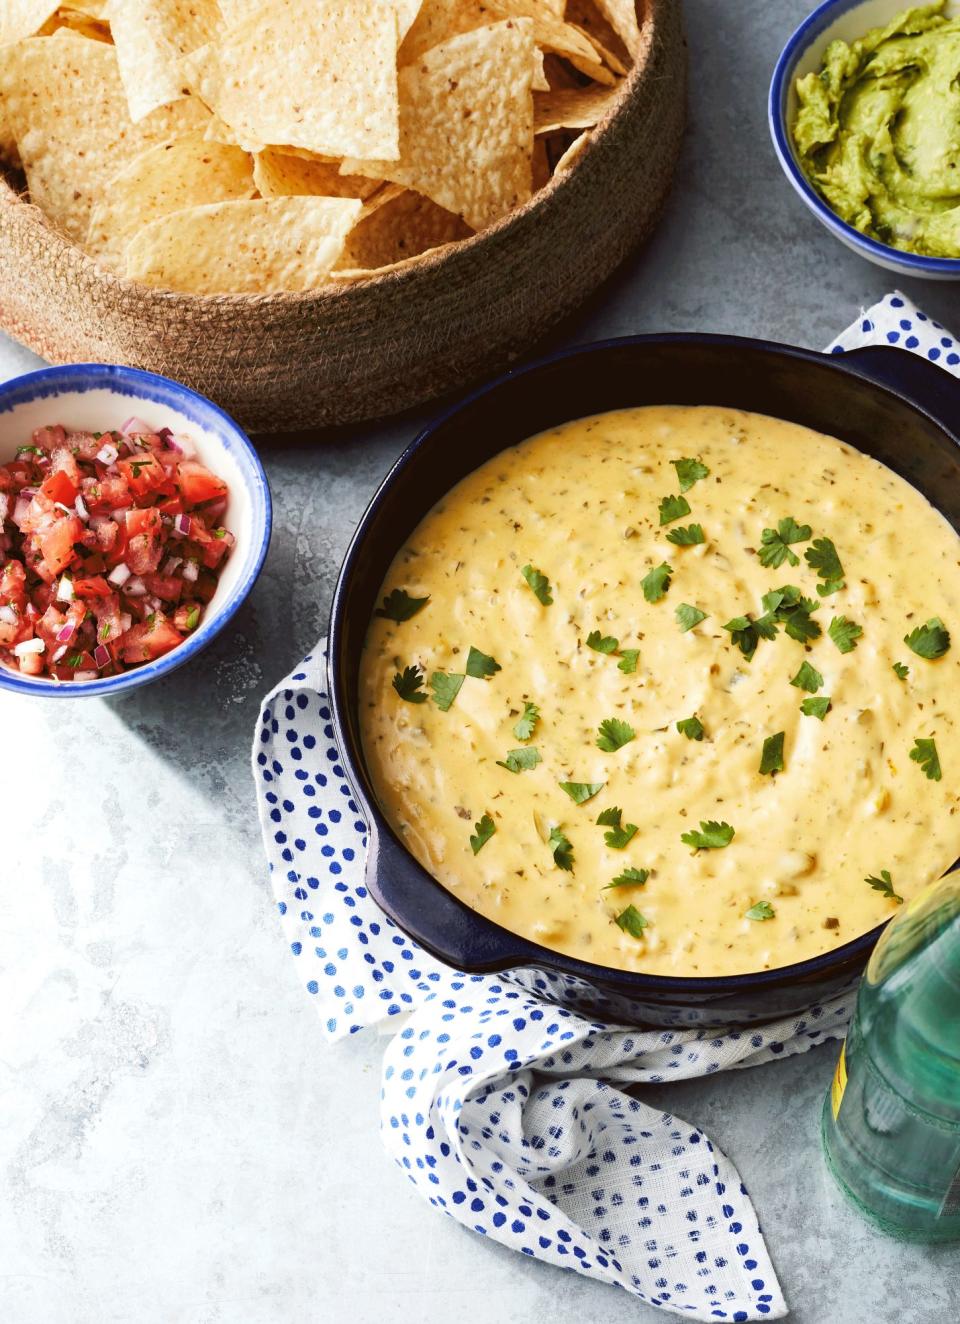 Austin Diner-Style Queso